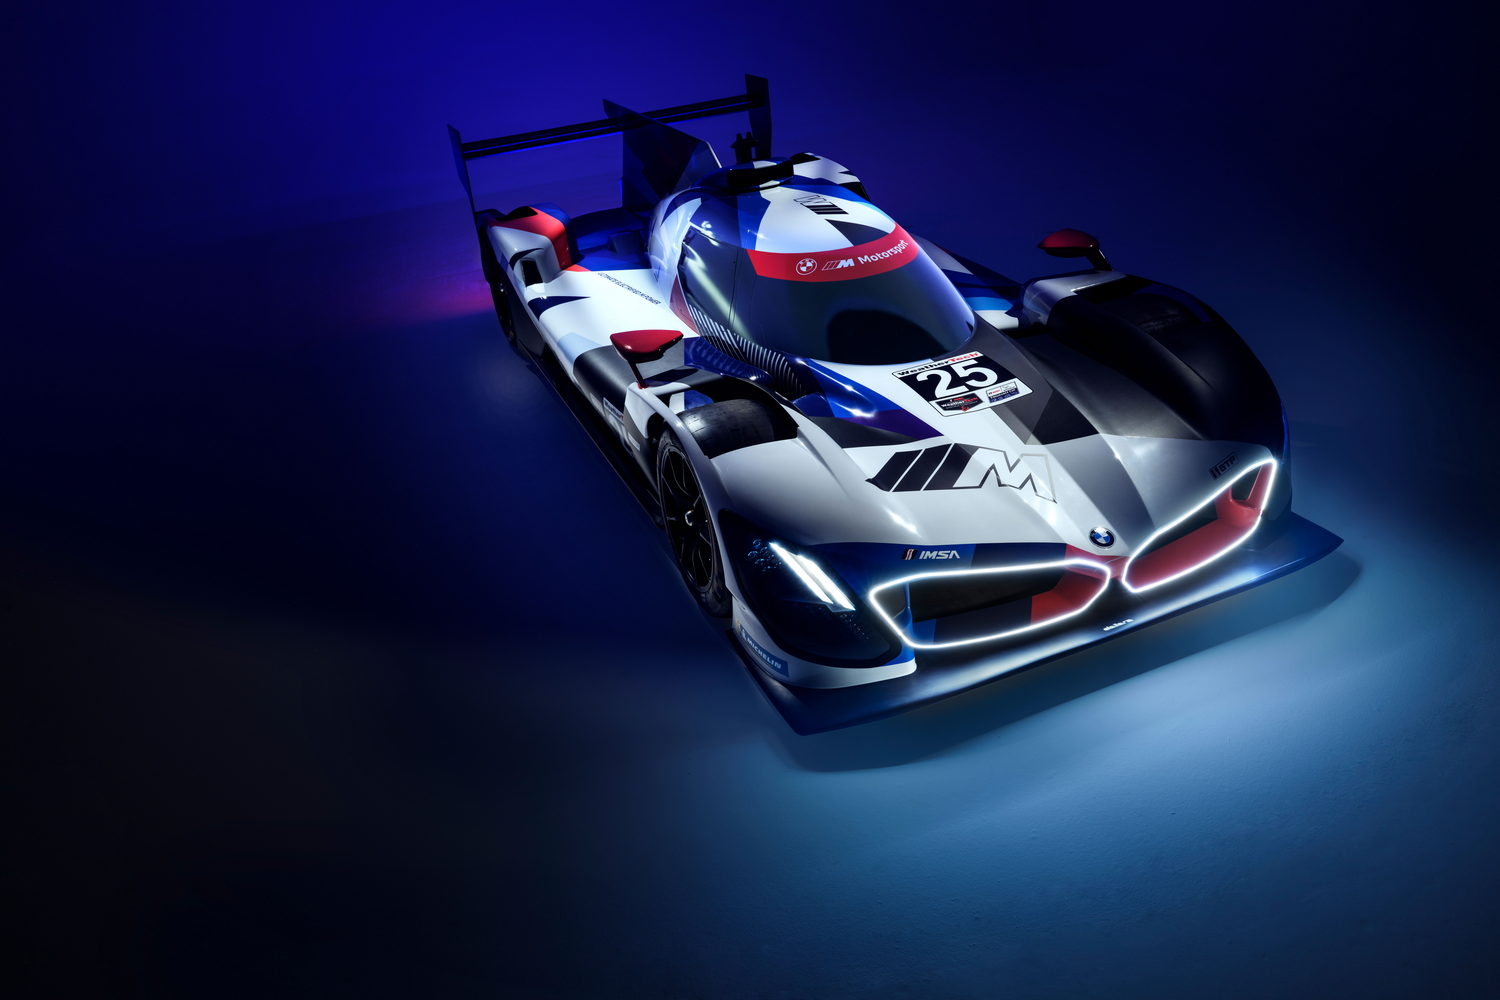 Car News | BMW shows off new racer's colours | CompleteCar.ie